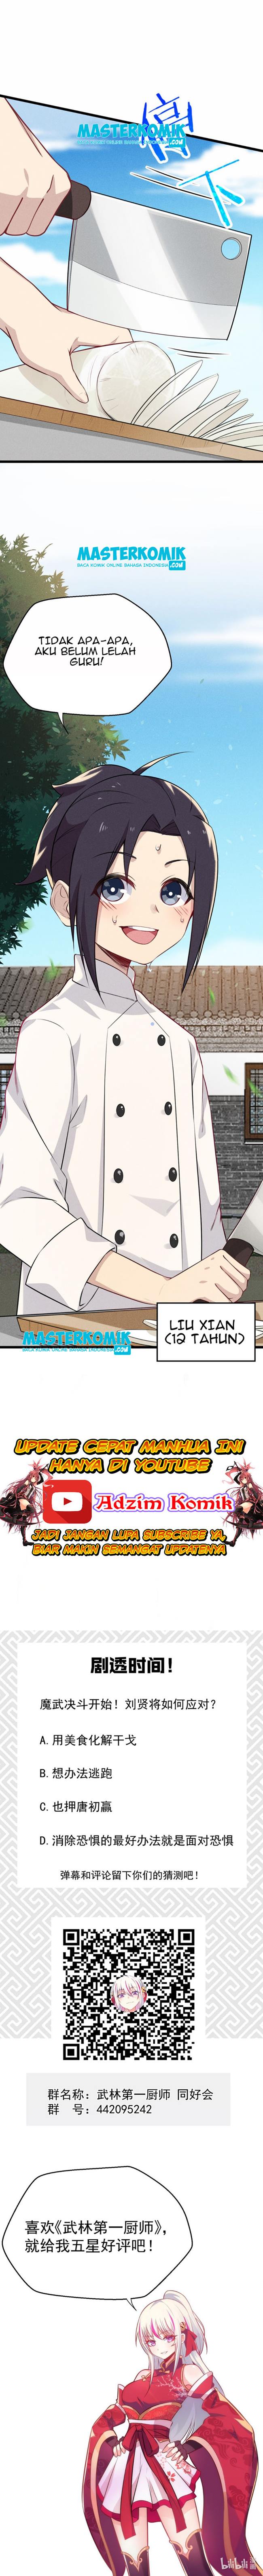 Supreme Martial Chef Chapter 9